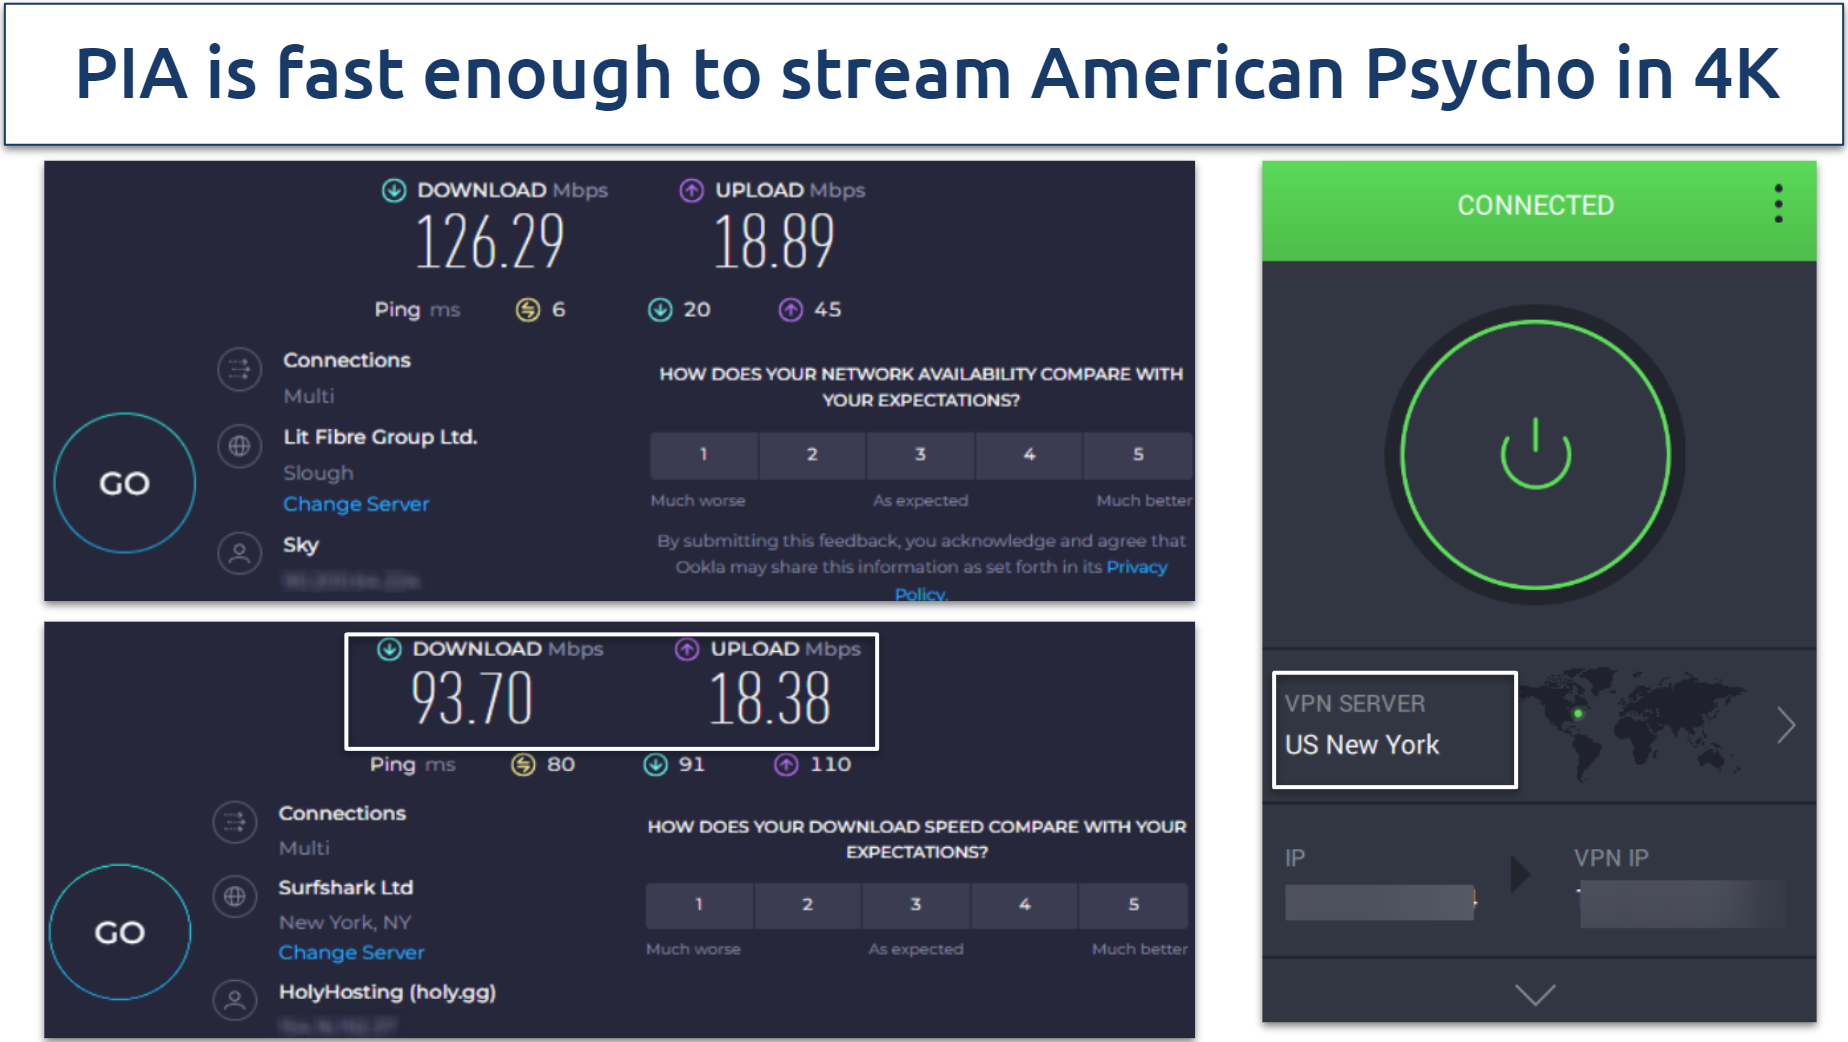 Pictures of PIA speed tests on the US server